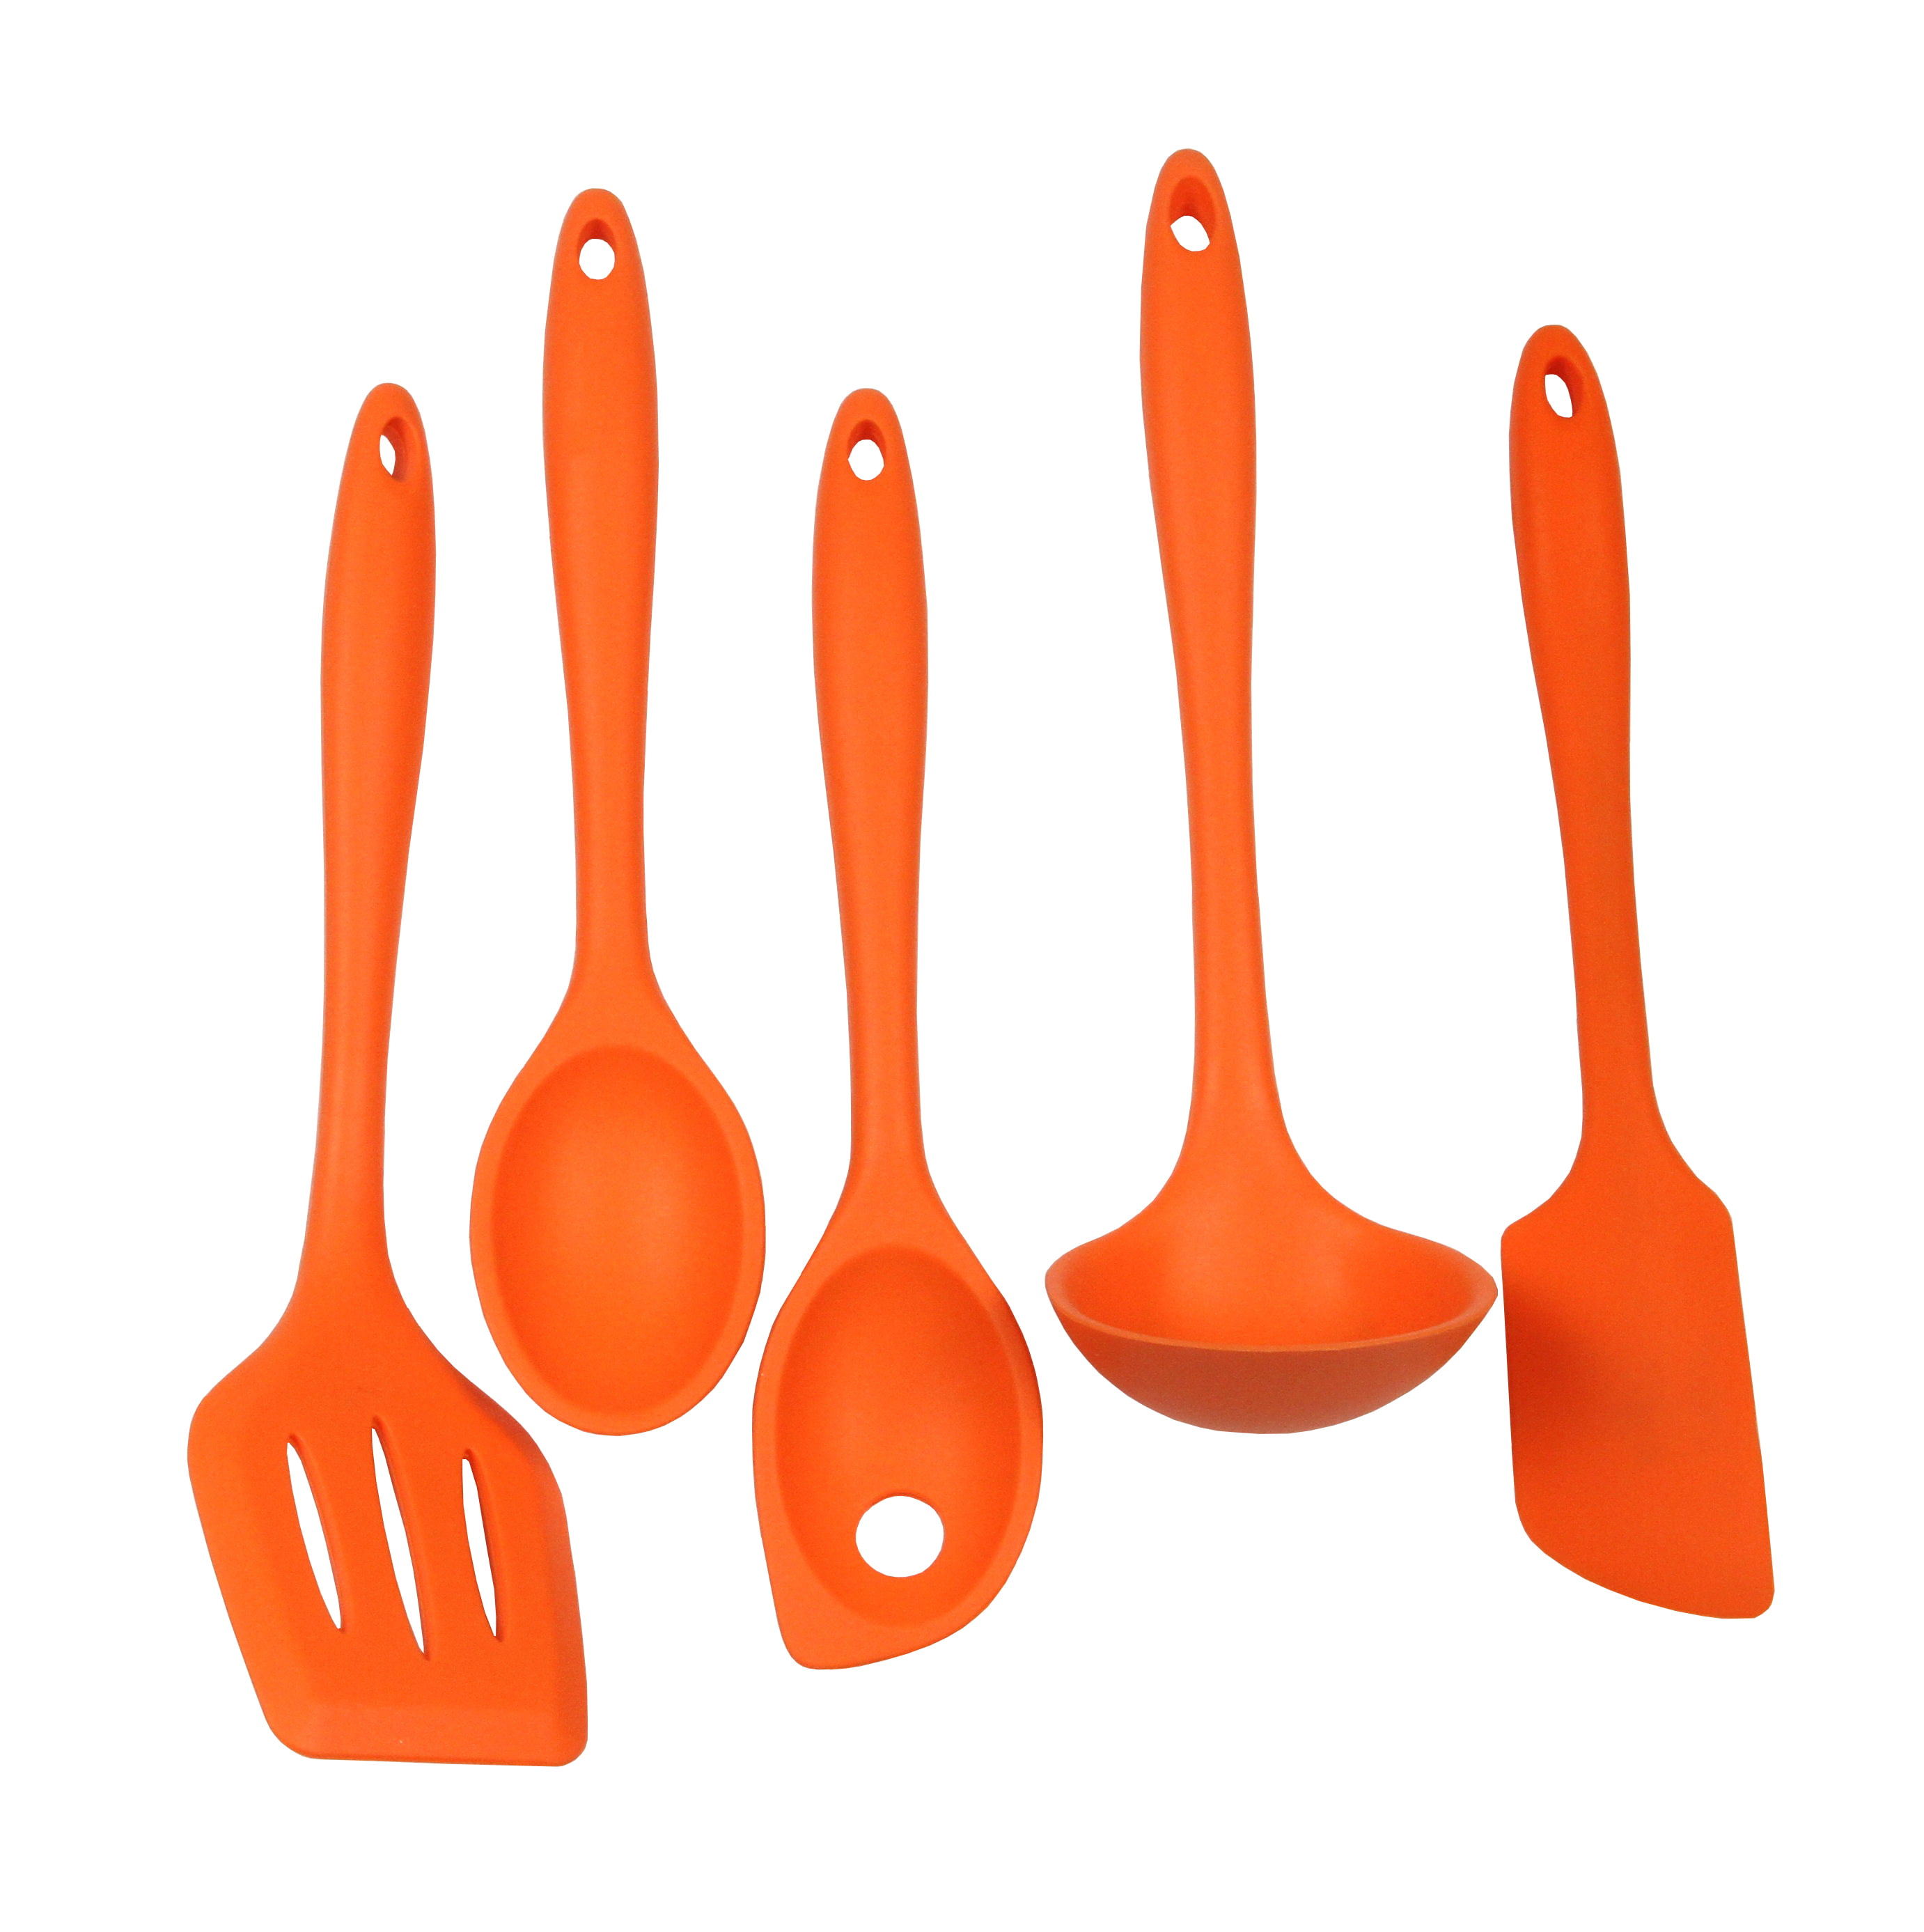 DEAL FOR YOUR PESACH KITCHEN  9-Piece Silicone Kitchen Cooking Utensil Set  Only $17.99 (Reg. $26.99) at